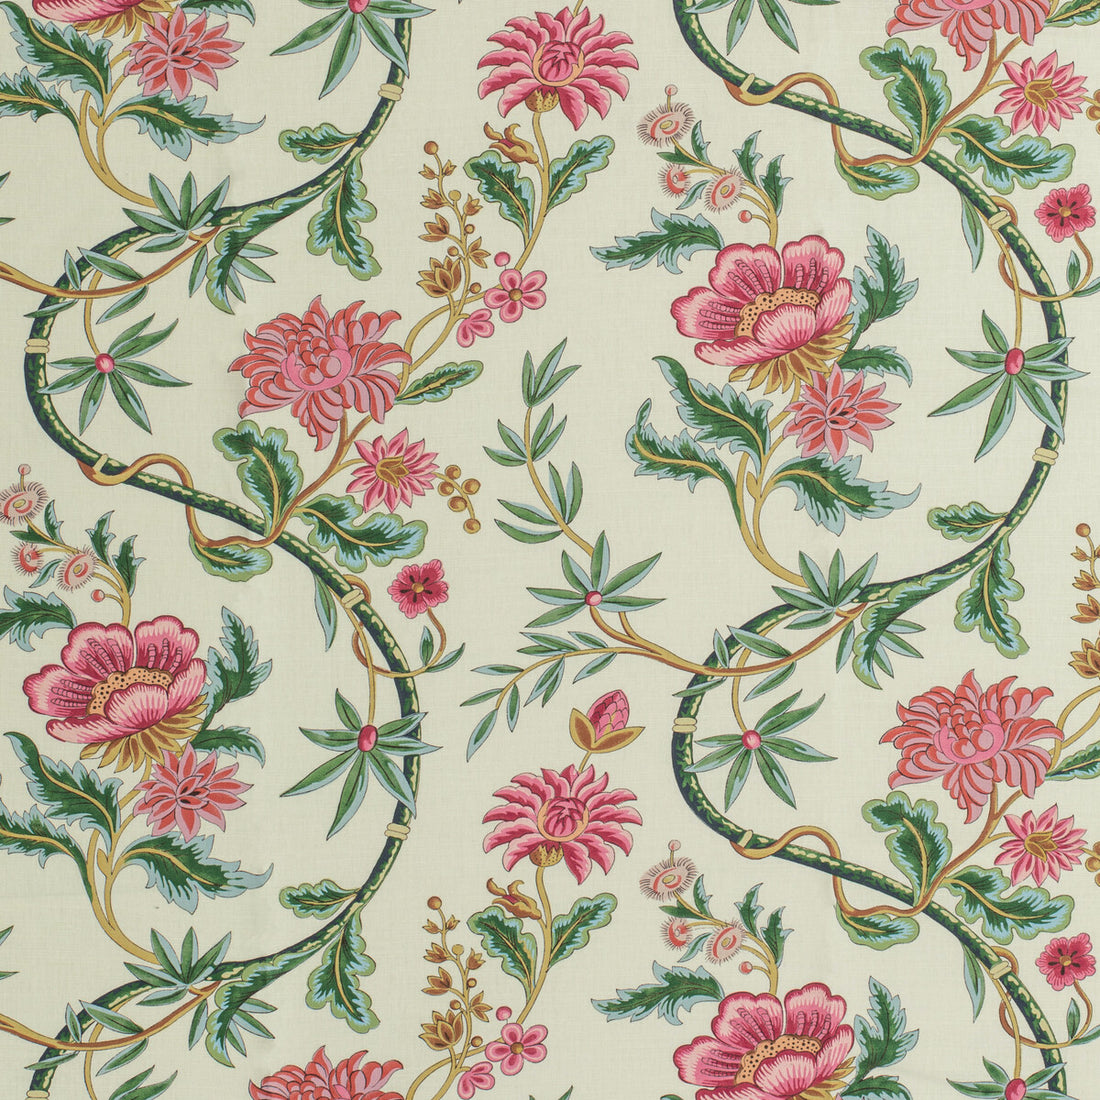 Veronique Print fabric in jewel color - pattern 8020122.37.0 - by Brunschwig &amp; Fils in the Louverne collection